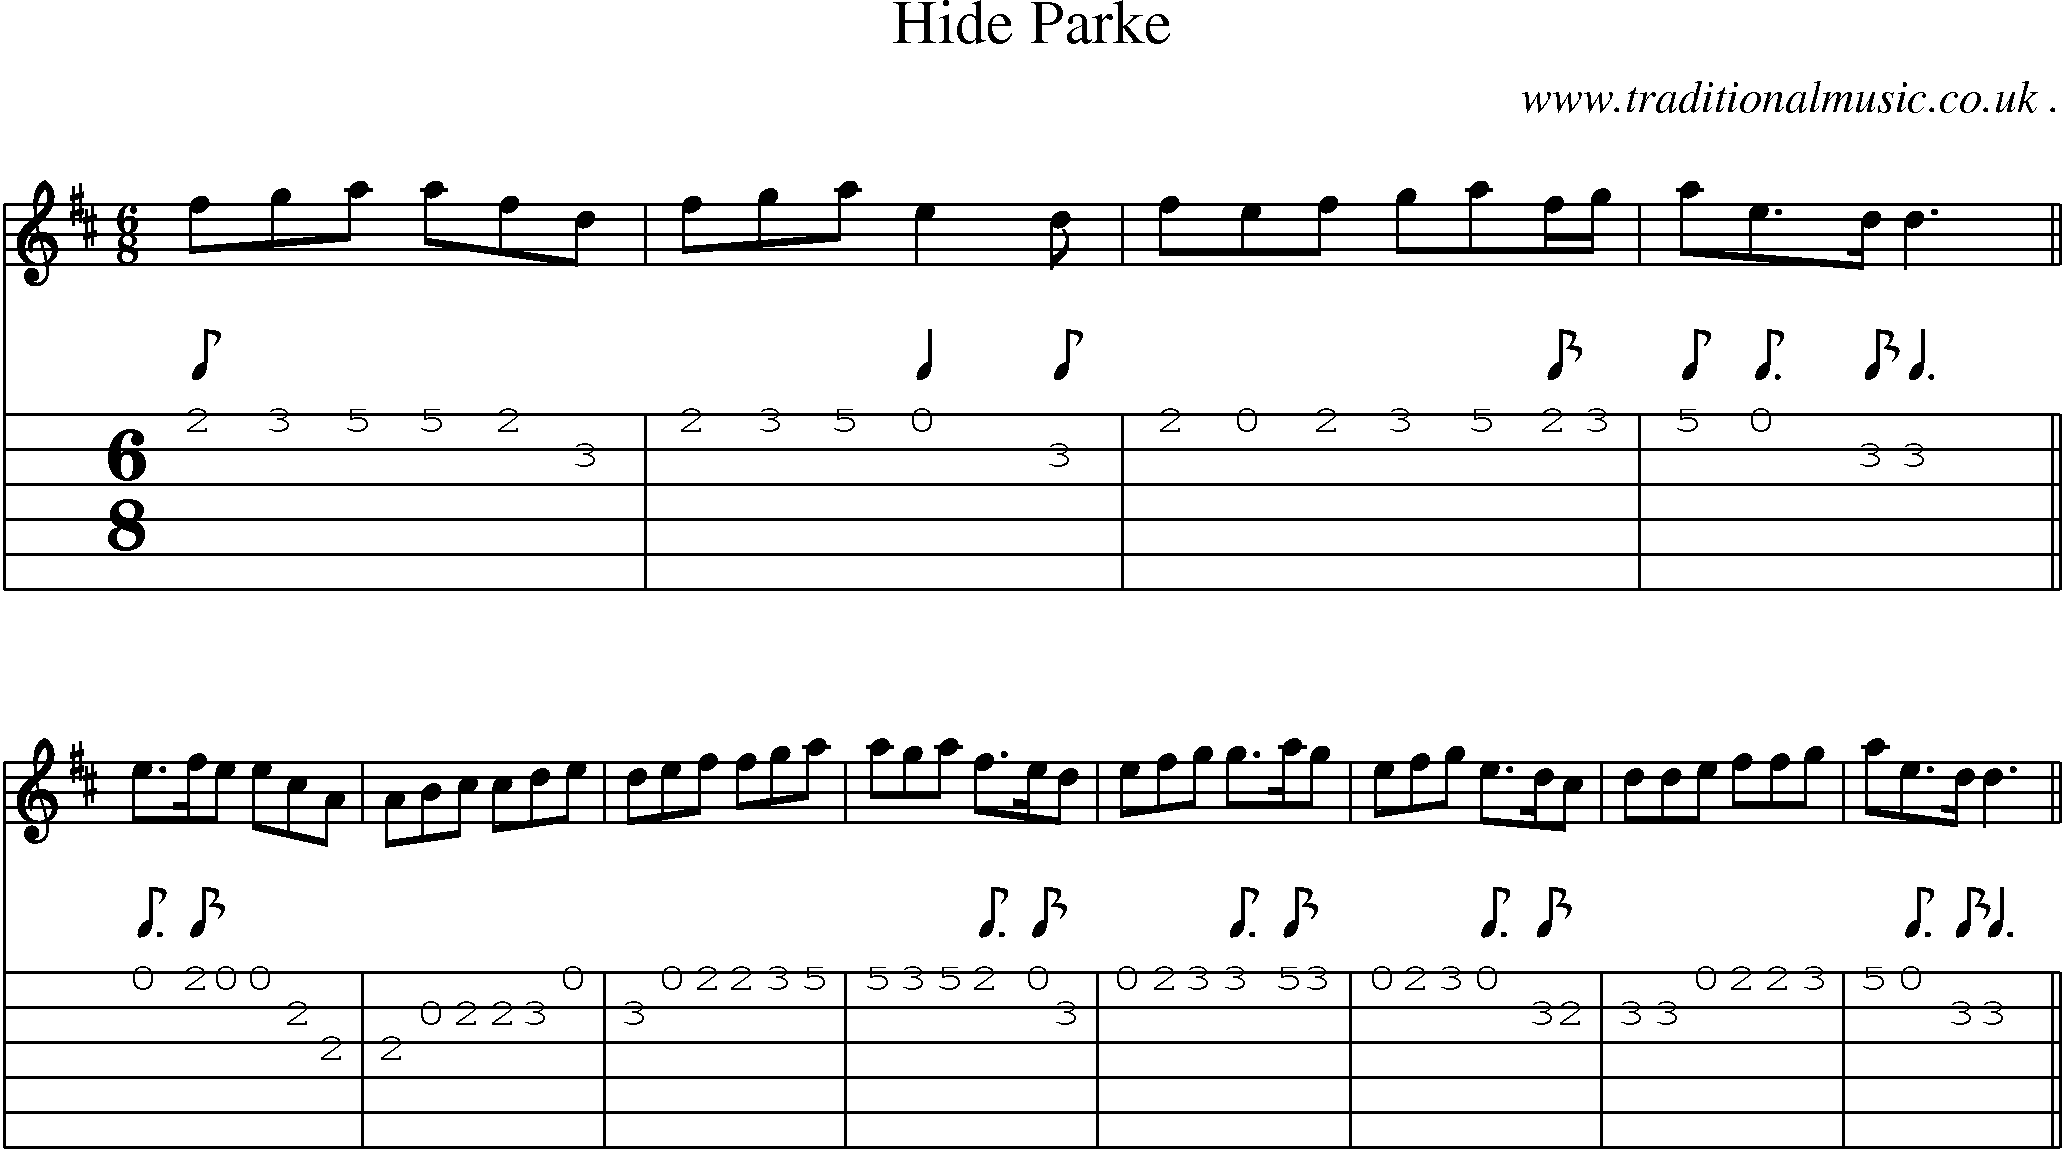 Sheet-music  score, Chords and Guitar Tabs for Hide Parke